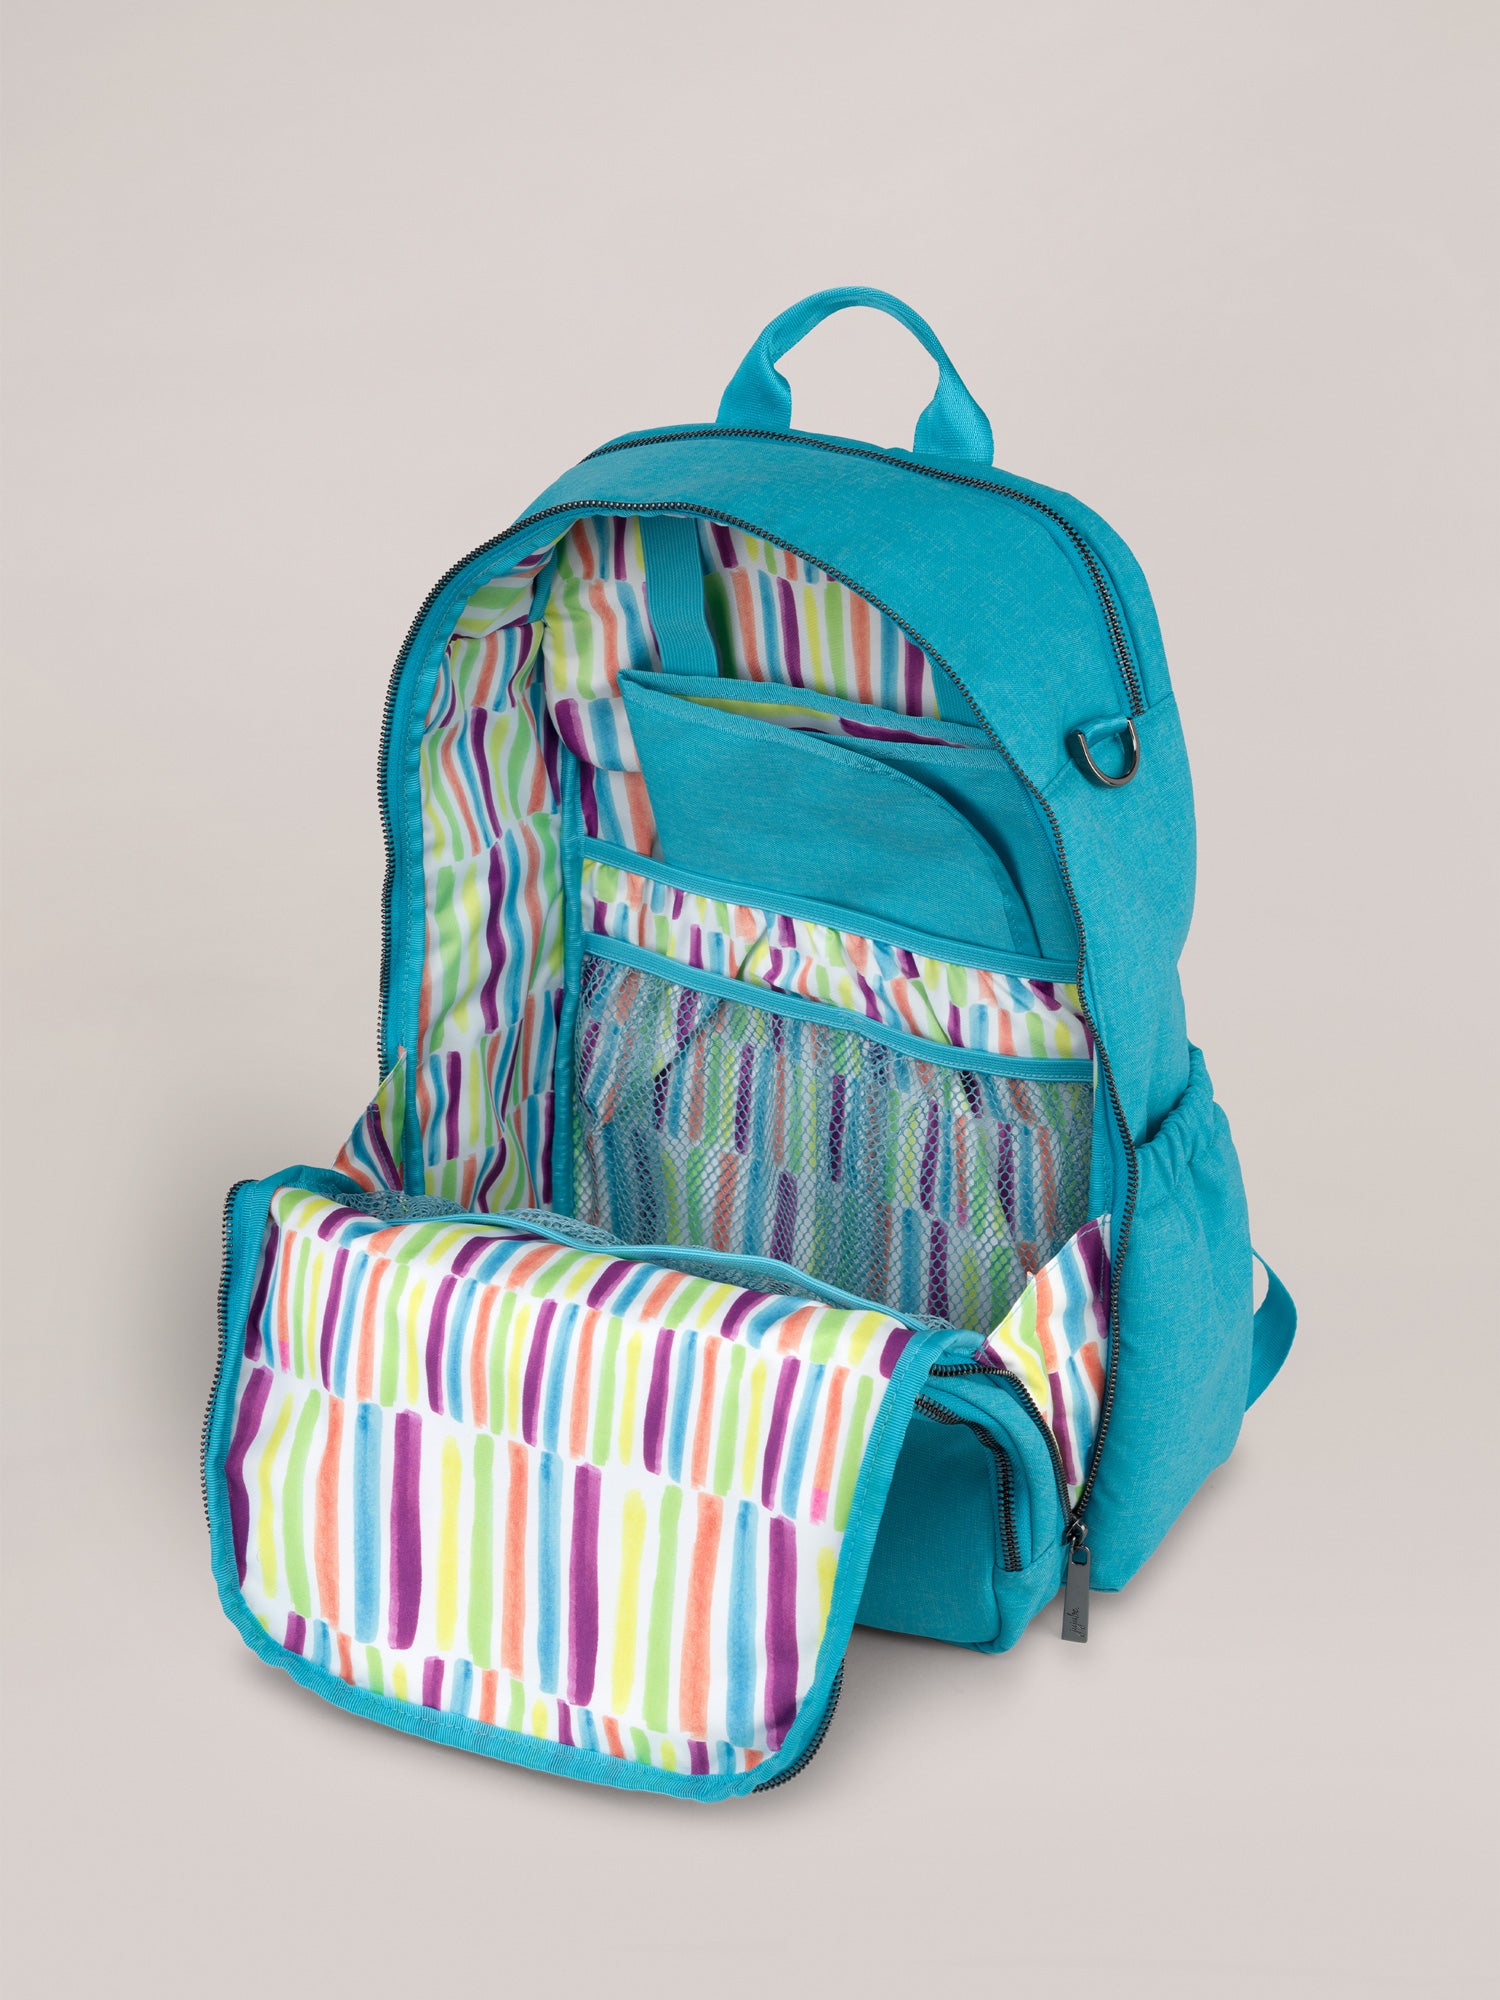 Bright Blue Zealous Backpack Top Down Interior View